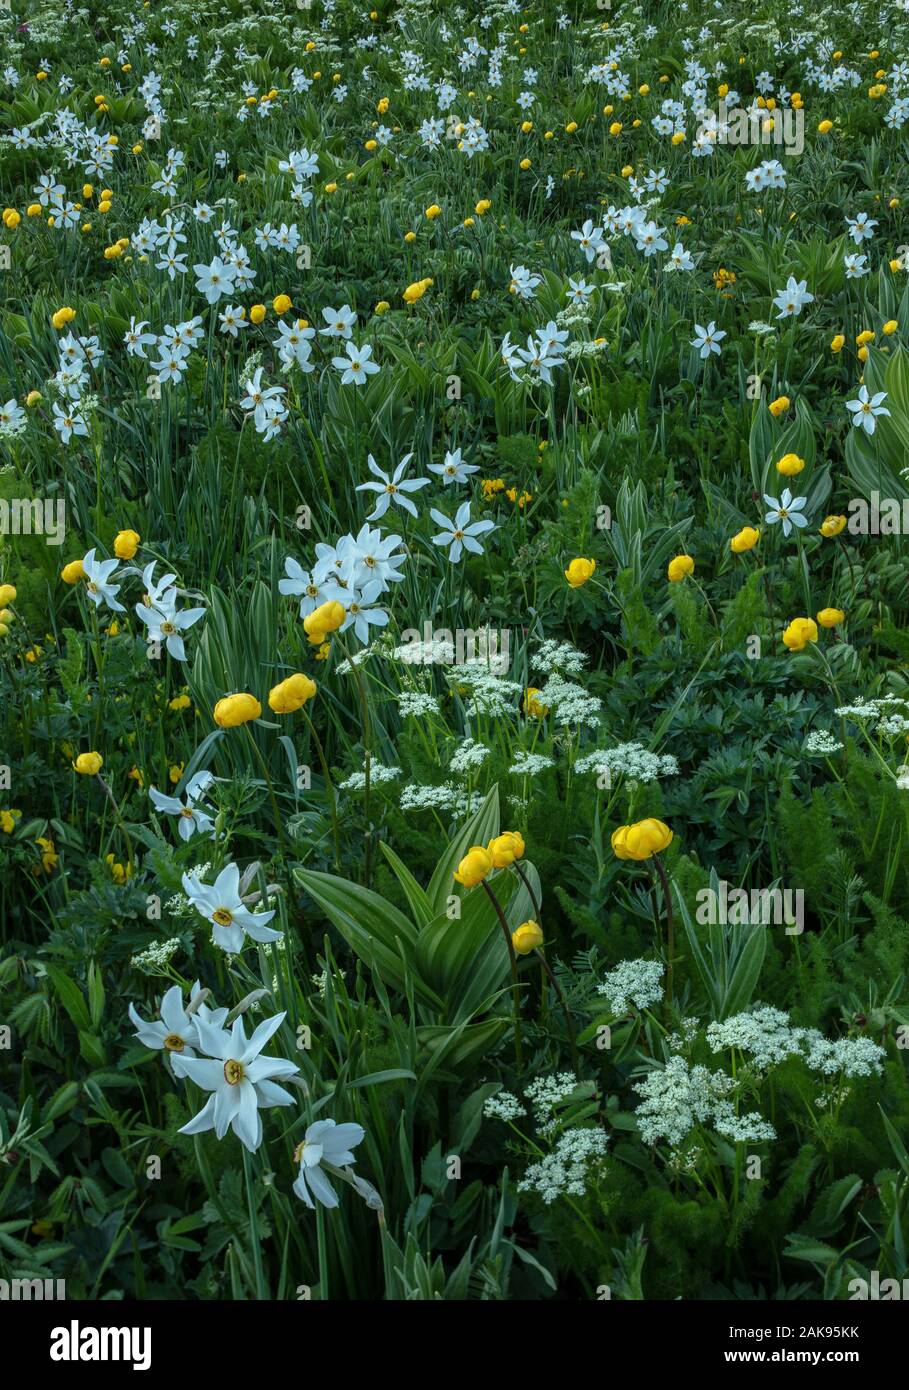 An alpine meadow on the Col du Lautaret, with Pheasant's eye, Globeflowers, Spignel, and White False Helleborine. French Alps. Stock Photo